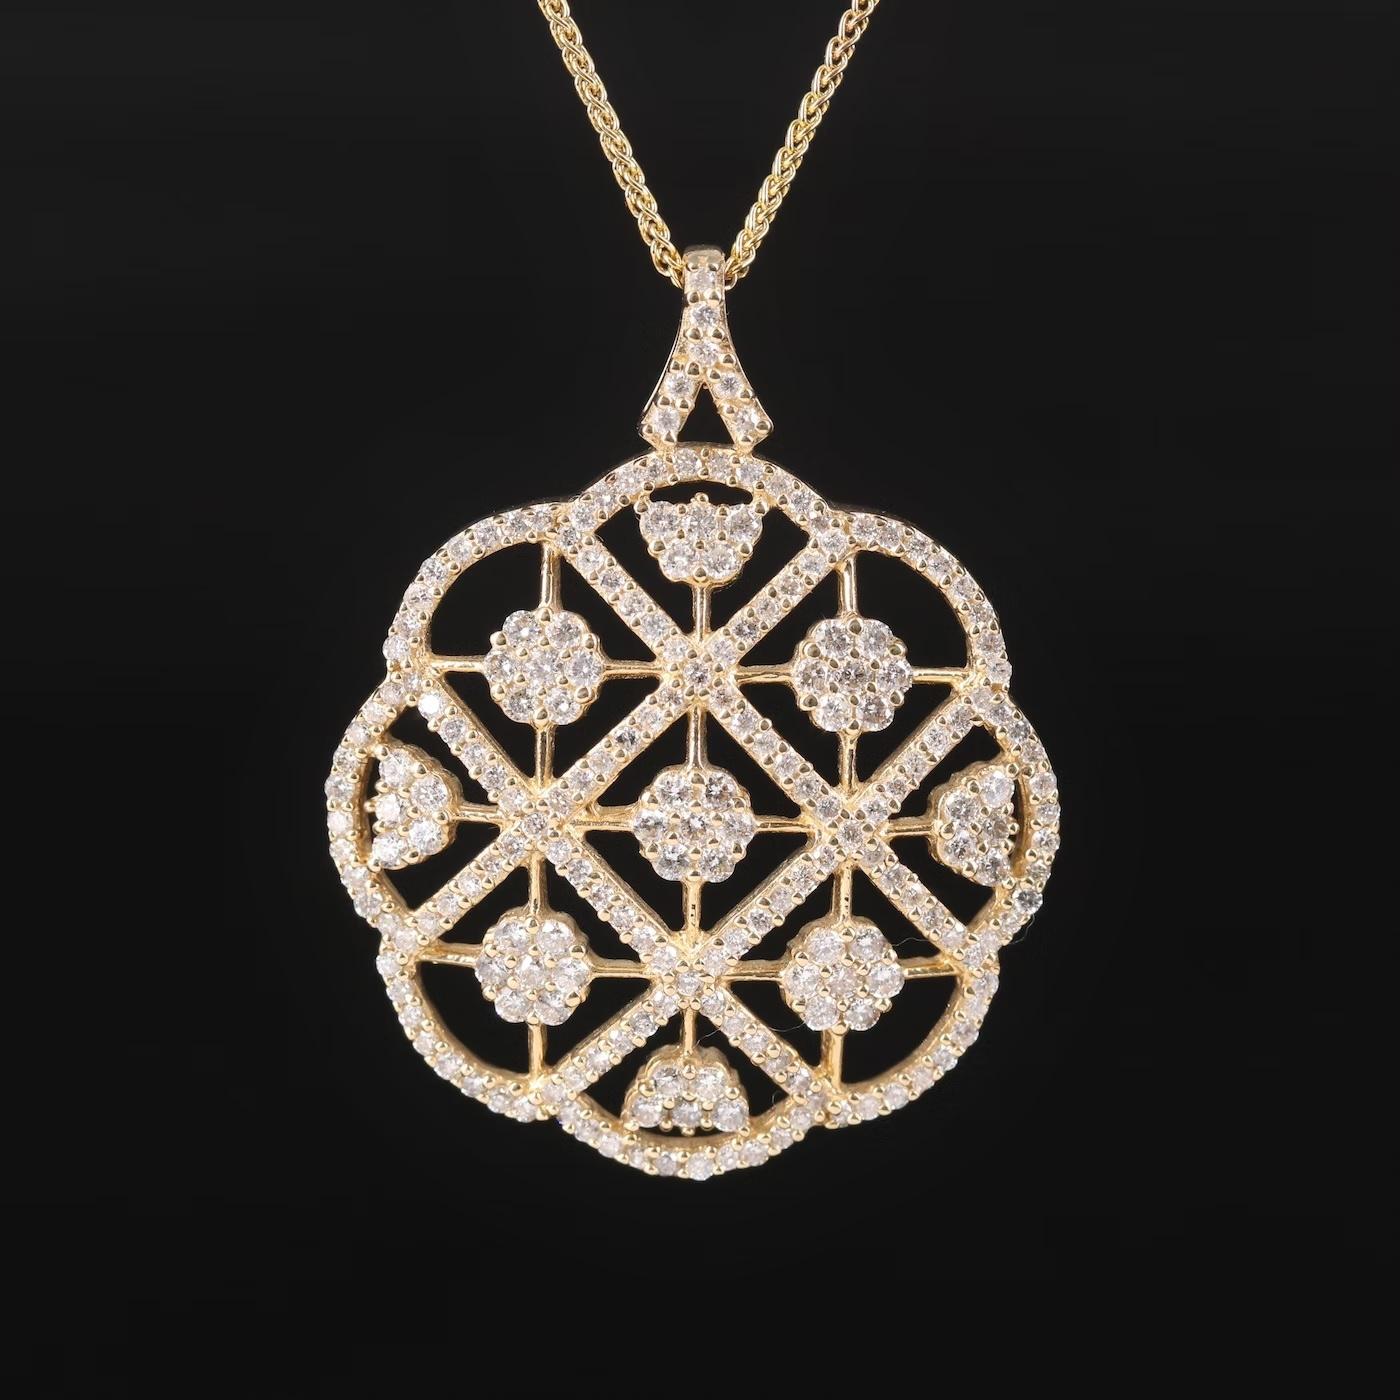 Designer EFFY necklace, fully hallmarked

Rare Limited Edition Diamond necklace 

NEW with tags, Tag price $9500

14K solid Yellow gold , stamped 14K

2.2 CWT diamonds, VS/G, Top Quality

Heavy and well made

The pendant is 1.5 inch in drop